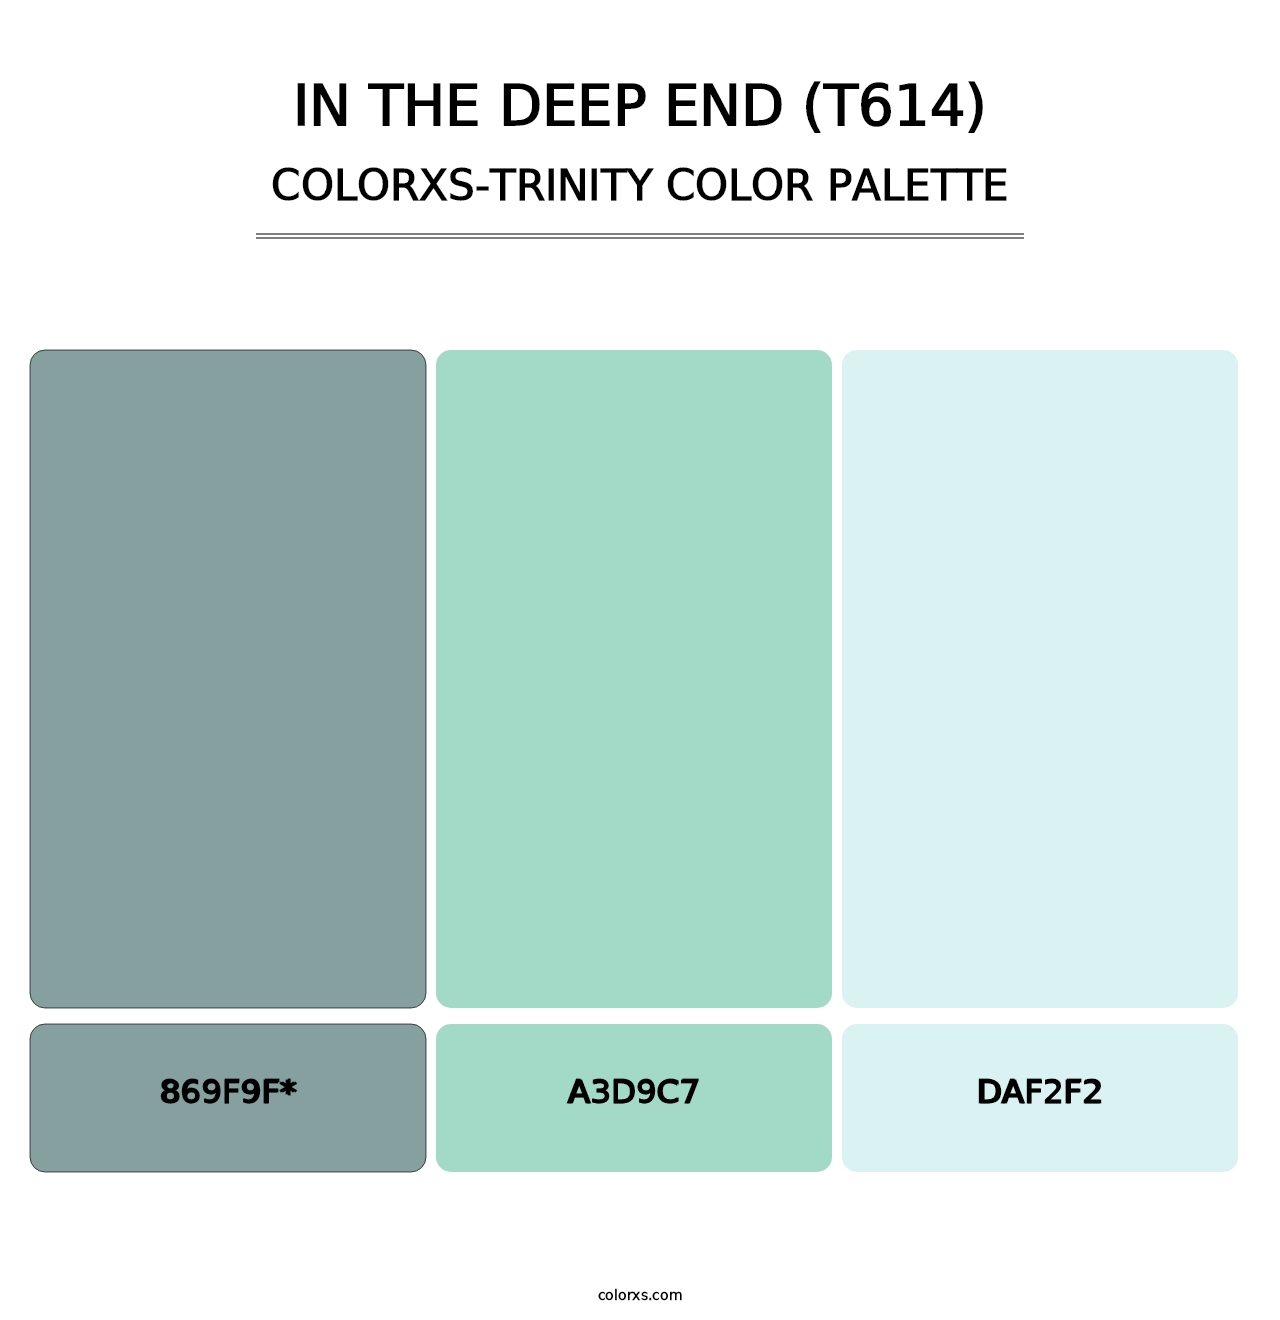 In the Deep End (T614) - Colorxs Trinity Palette